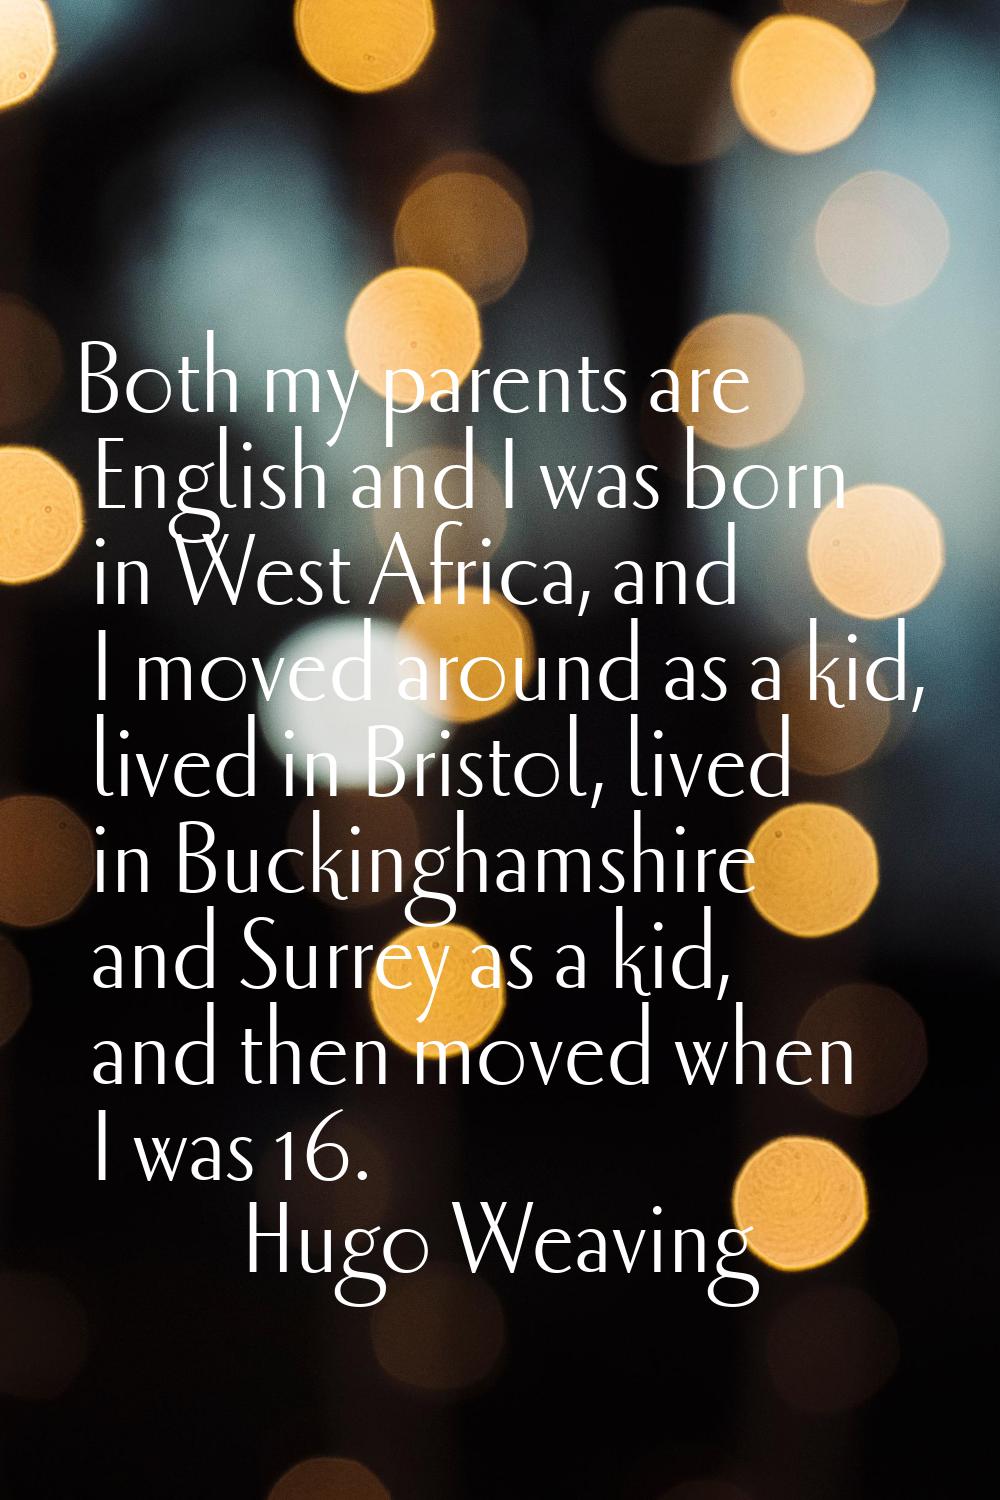 Both my parents are English and I was born in West Africa, and I moved around as a kid, lived in Br